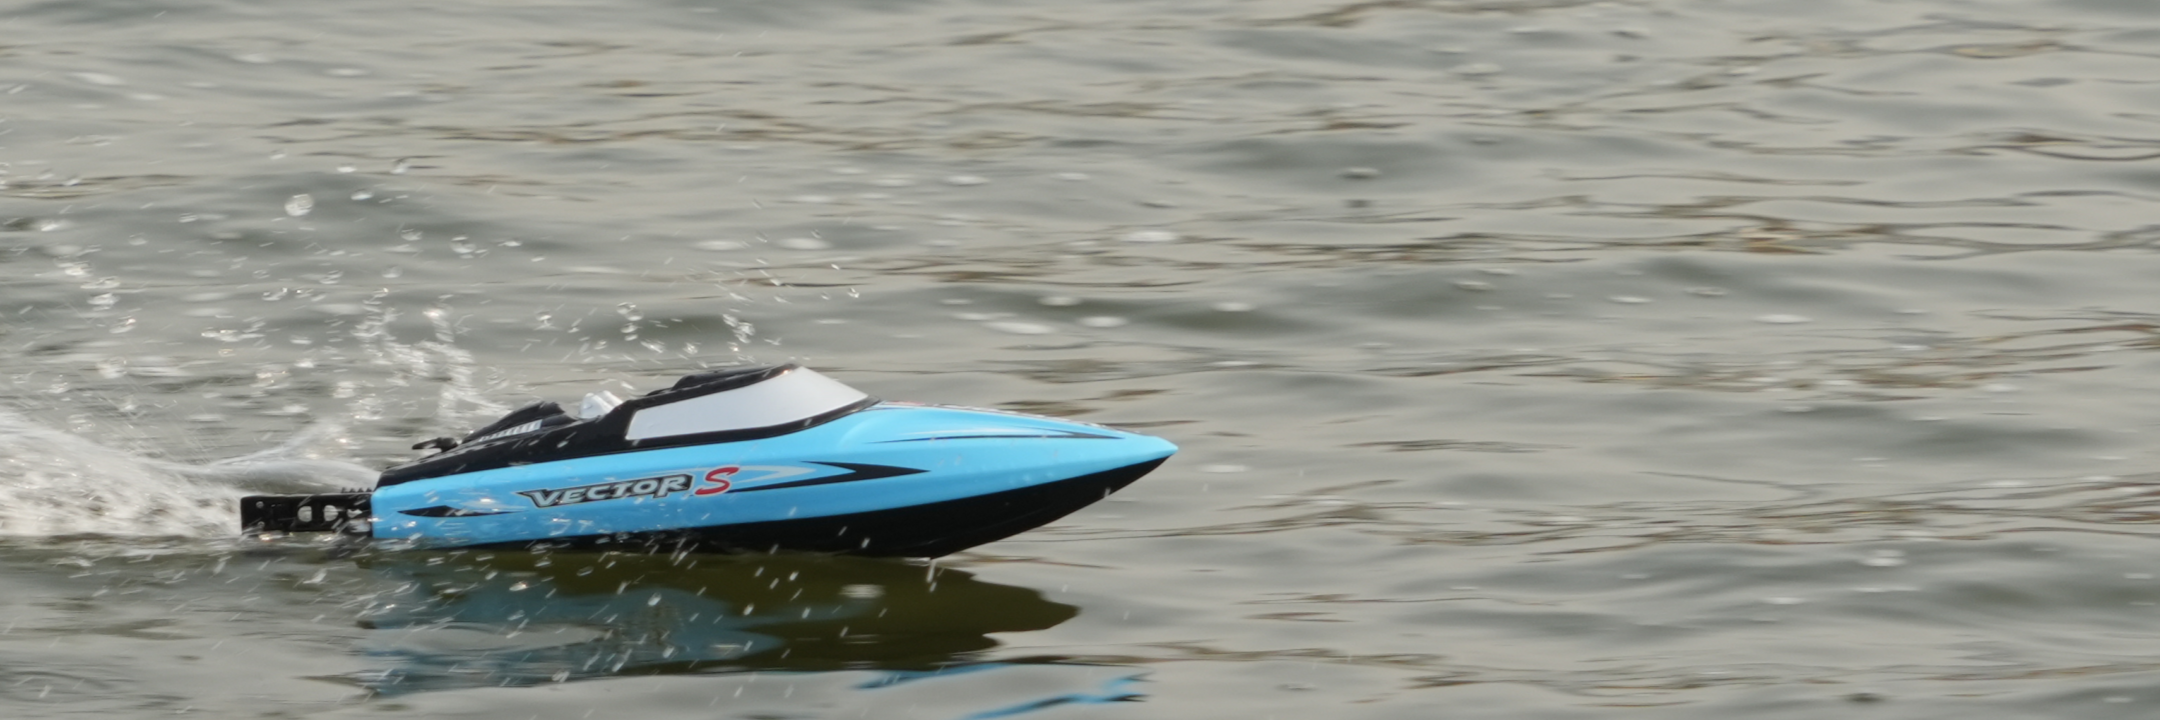 rc boats page banner